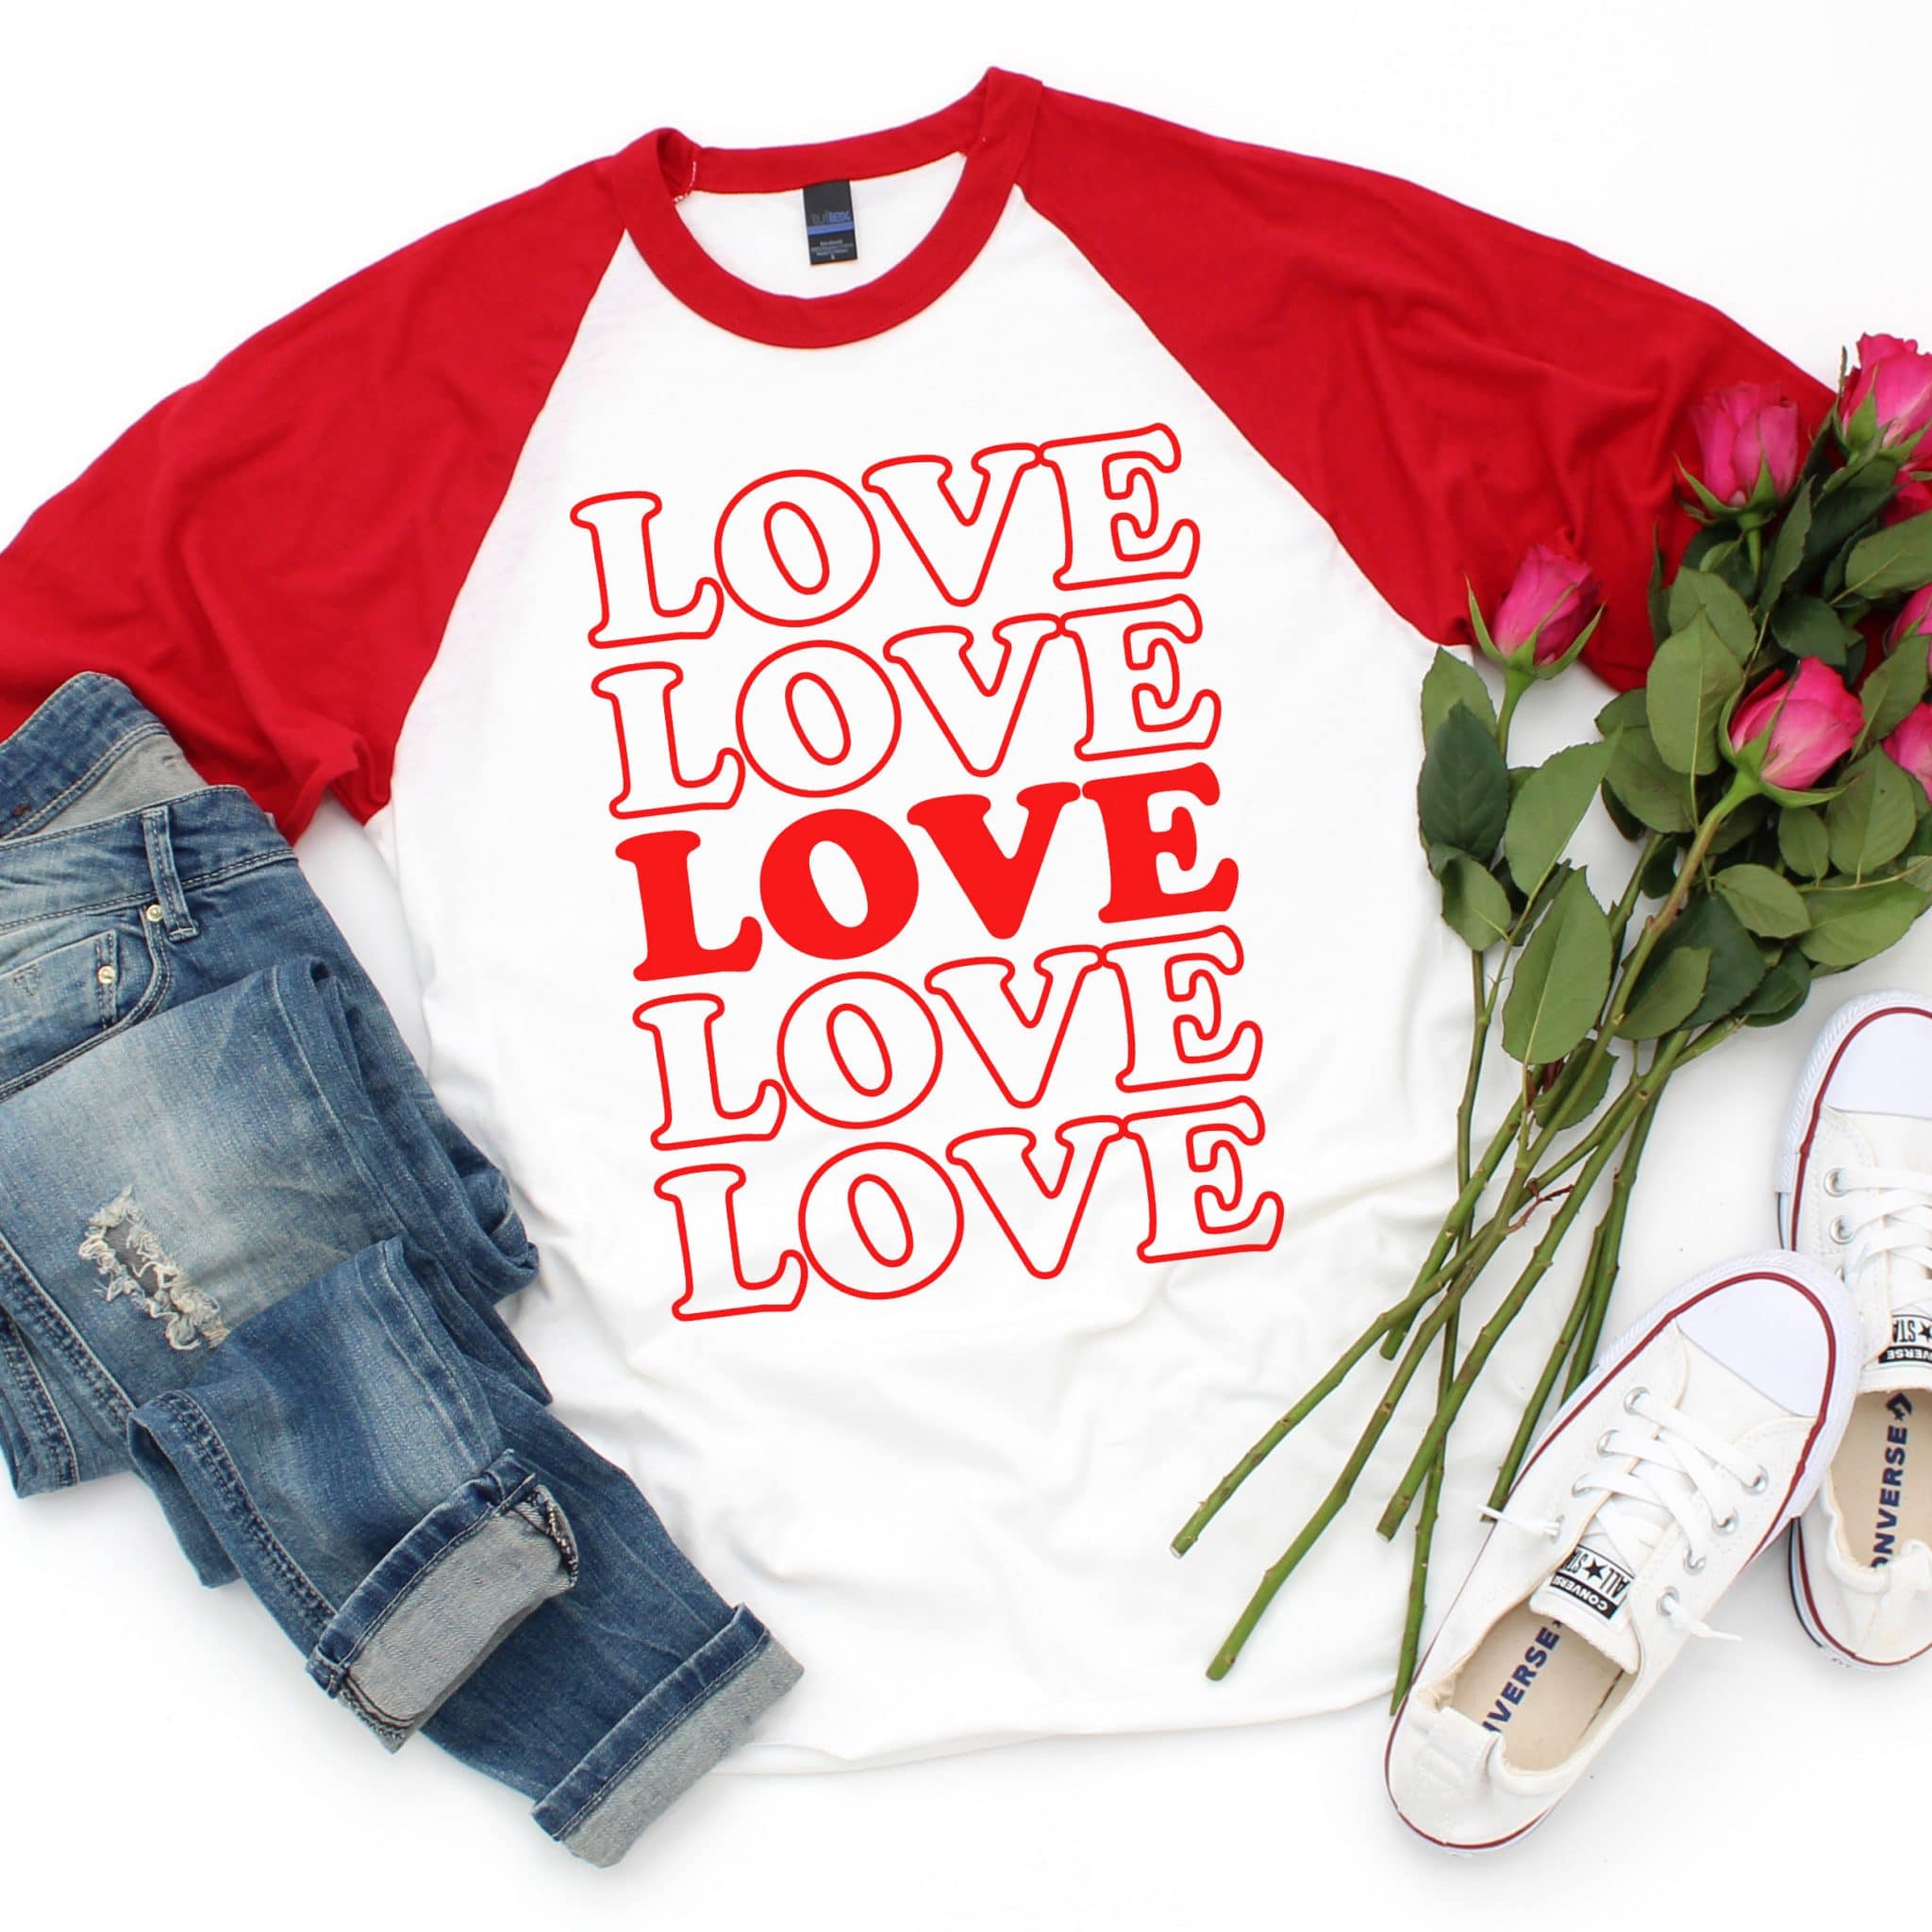 LOVE svg file on red and white baseball tee with accessories